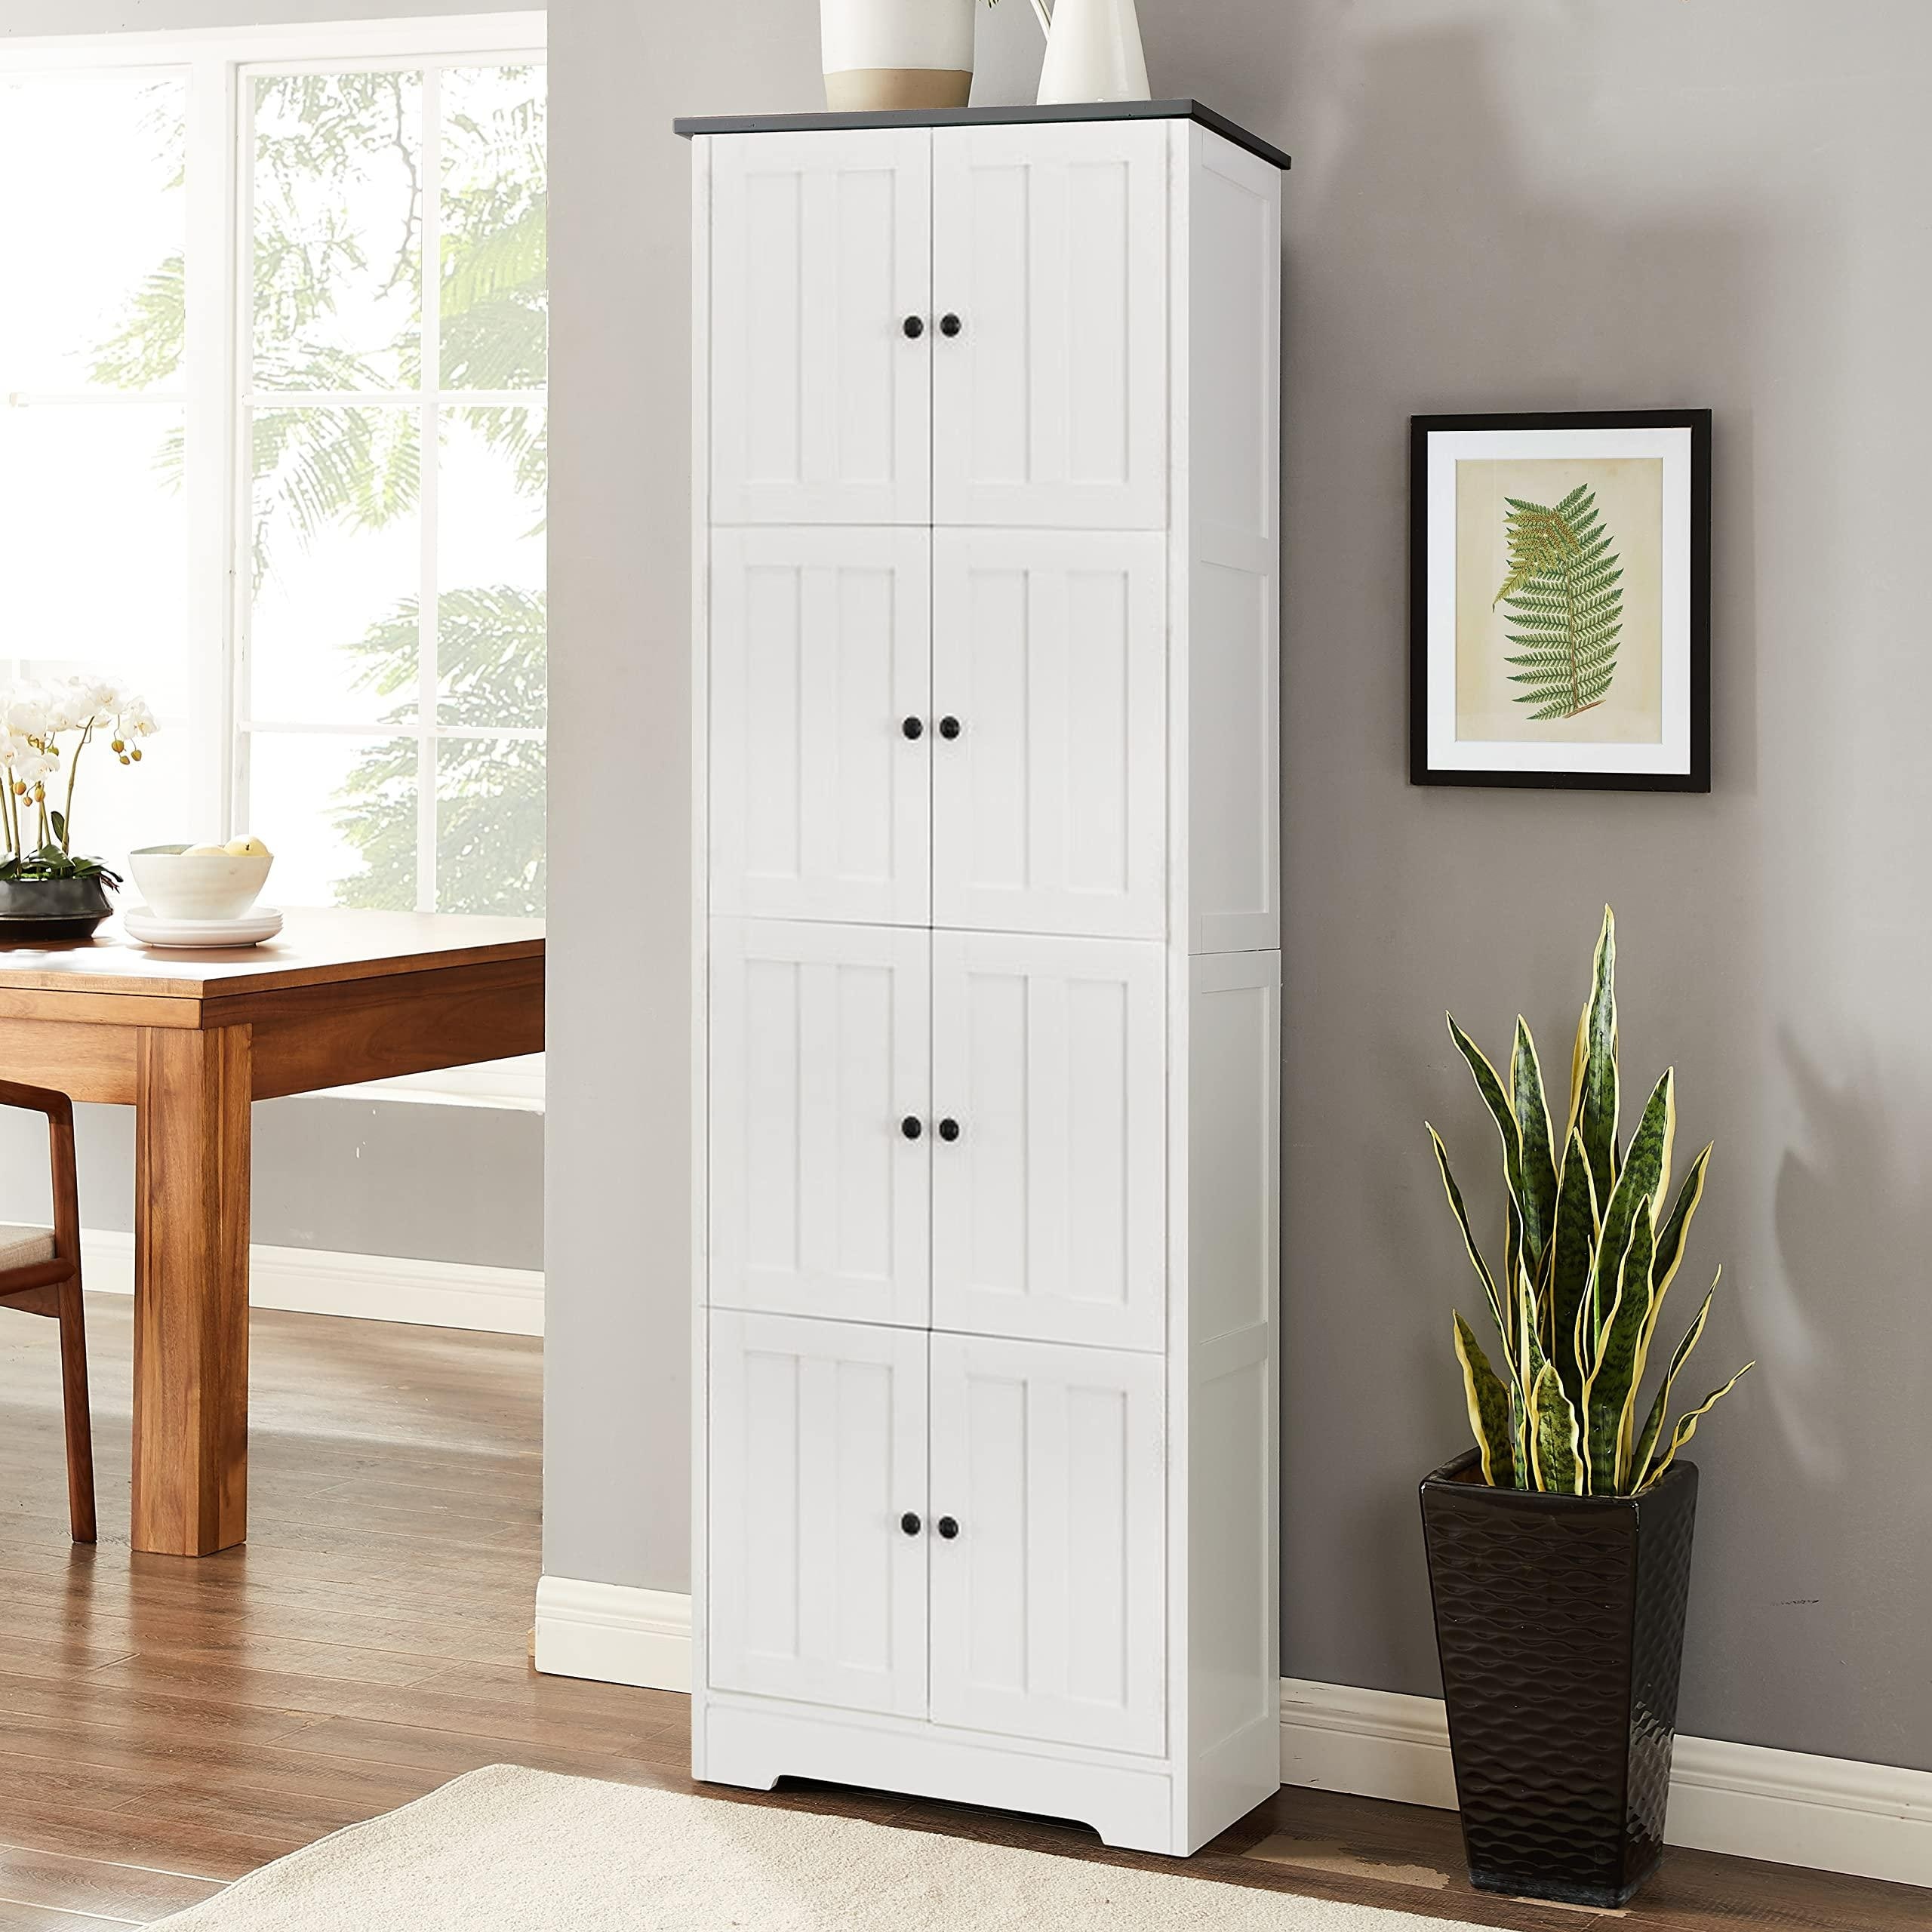 https://ak1.ostkcdn.com/images/products/is/images/direct/8aef1a6db0160649861729268f2f77b6aa0653cd/Modern-Tall-Storage-Cabinet-with-Doors-and-Shelves%2C-Freestanding-Cabinet%2C-Bathroom-Cabinet%2C-Floor-Cabinet.jpg